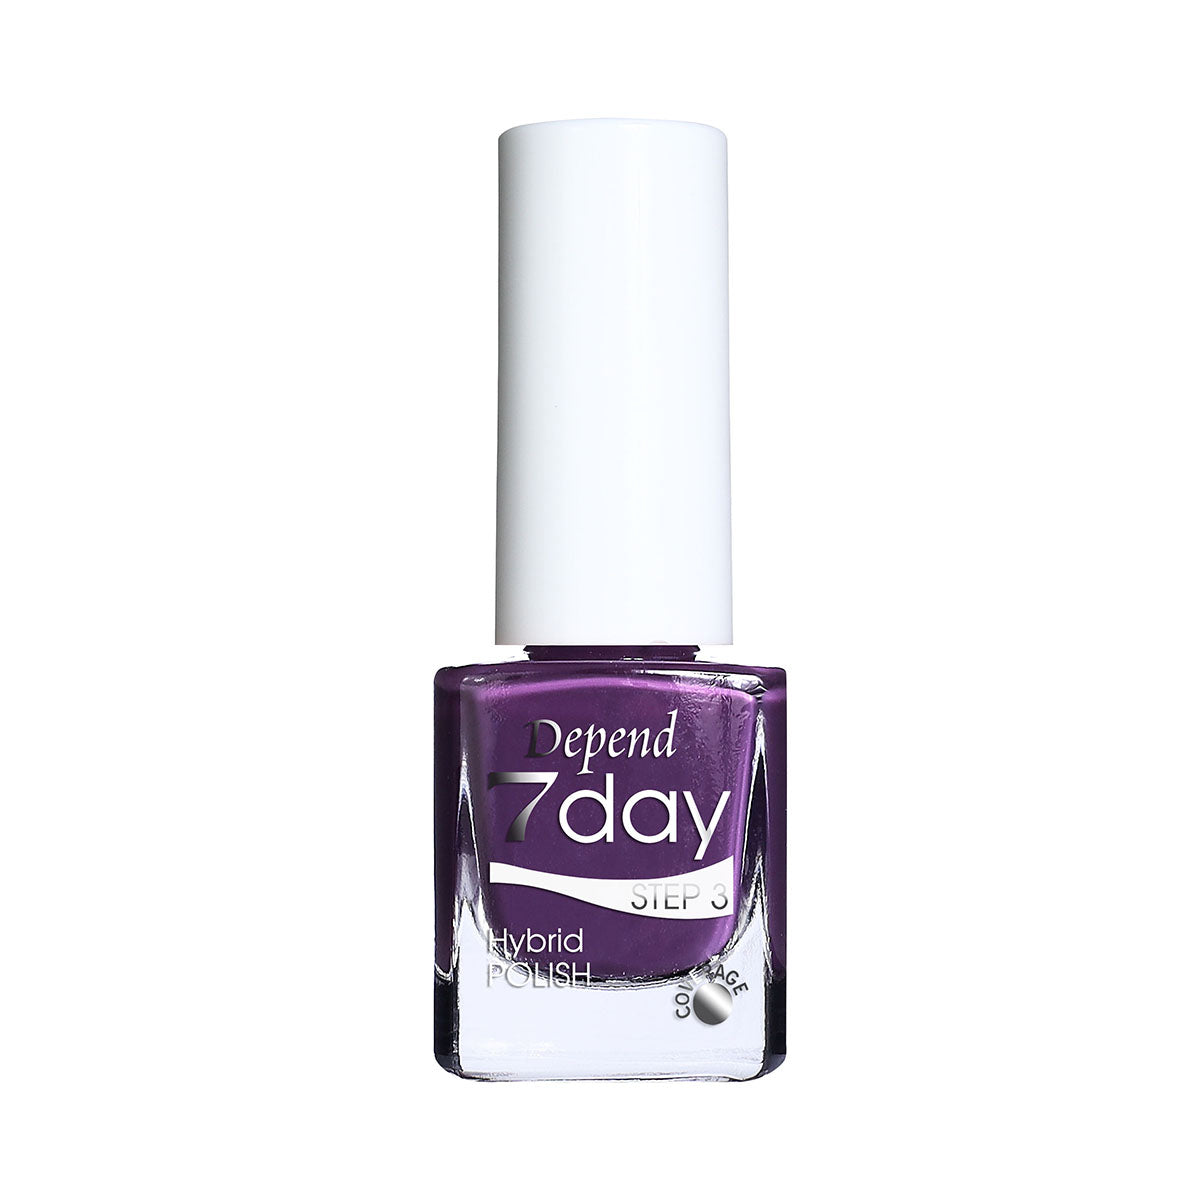 Depend 7day
Hybrid Polish-Casual Chic-7220